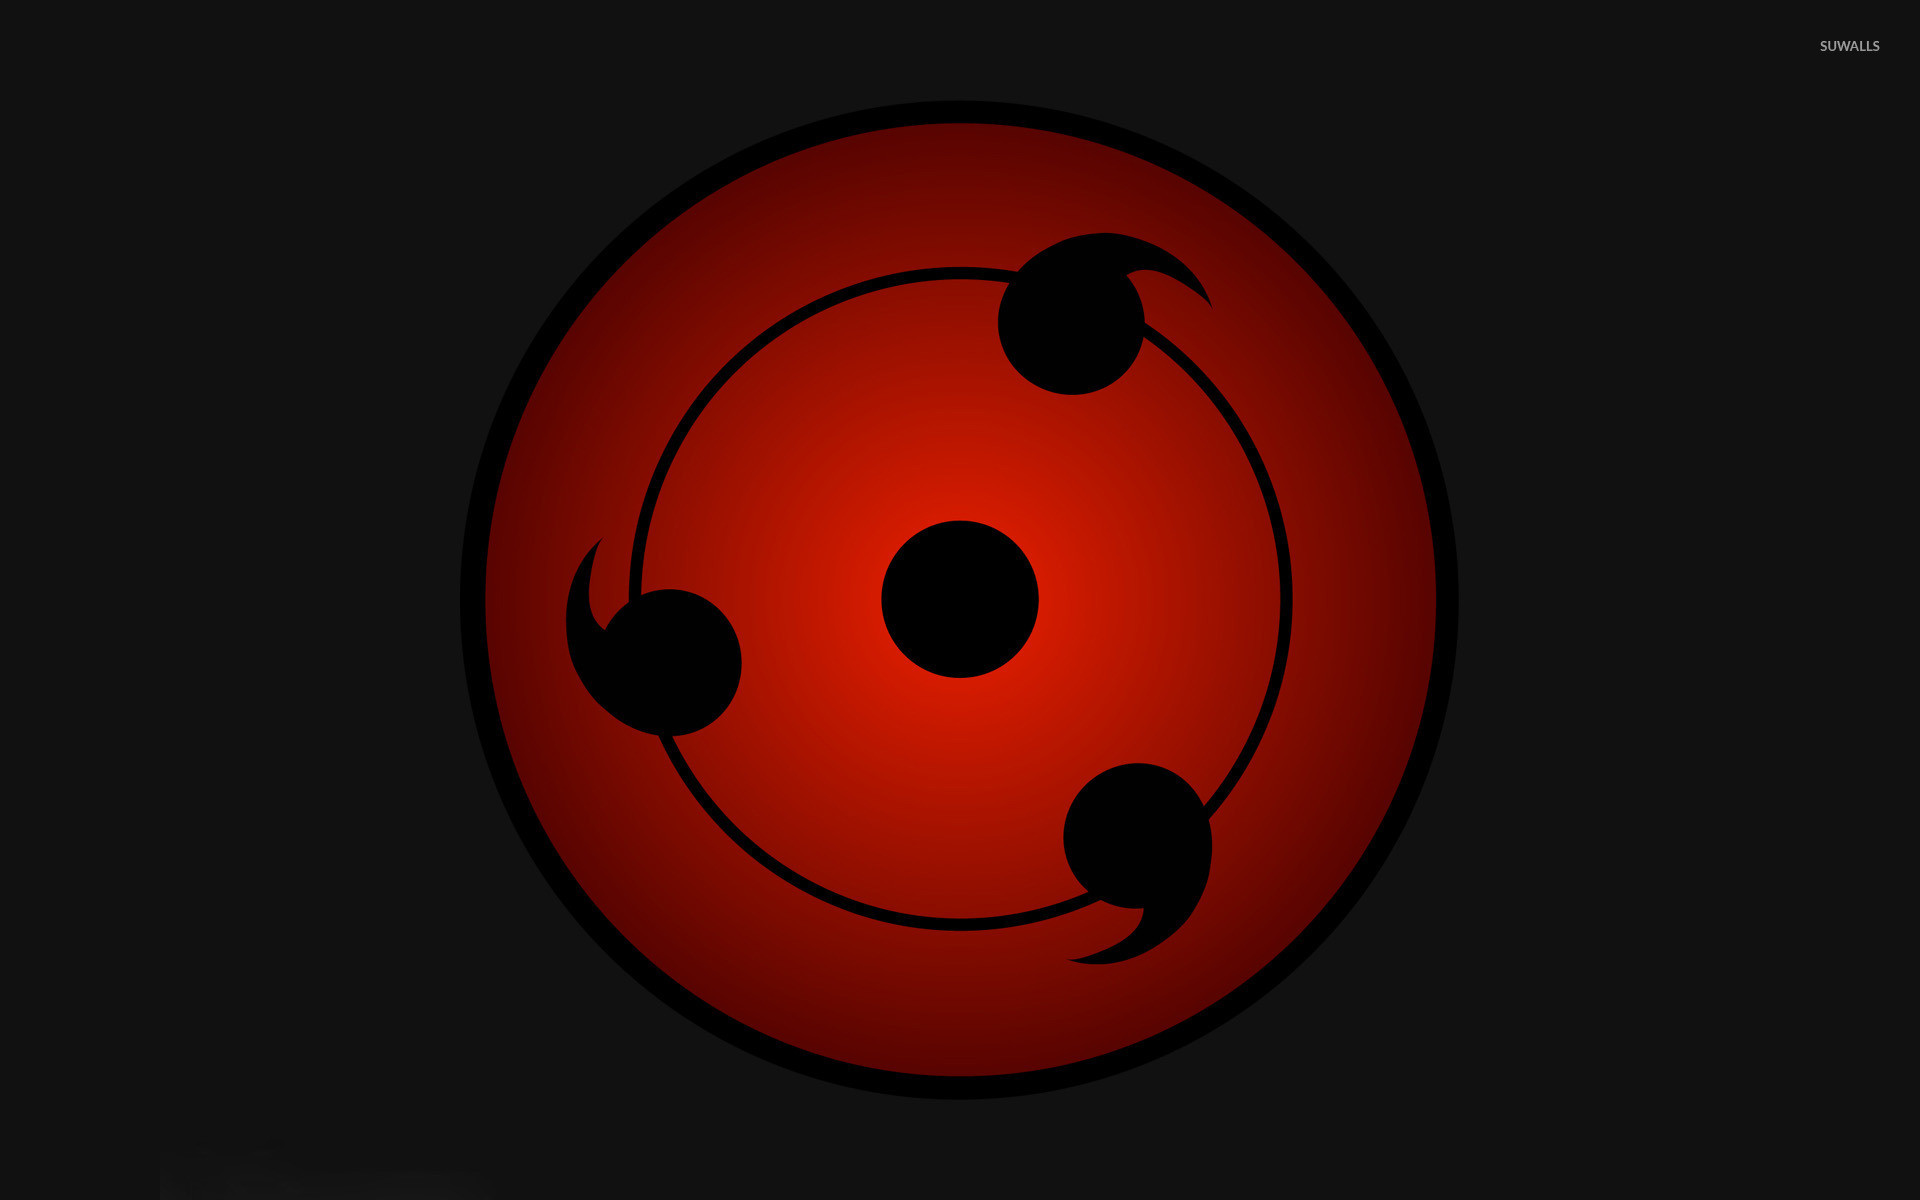 How To Get A Sharingan Live Wallpaper for iPhone  Naruto Live Wallpapers  for iPhone  YouTube